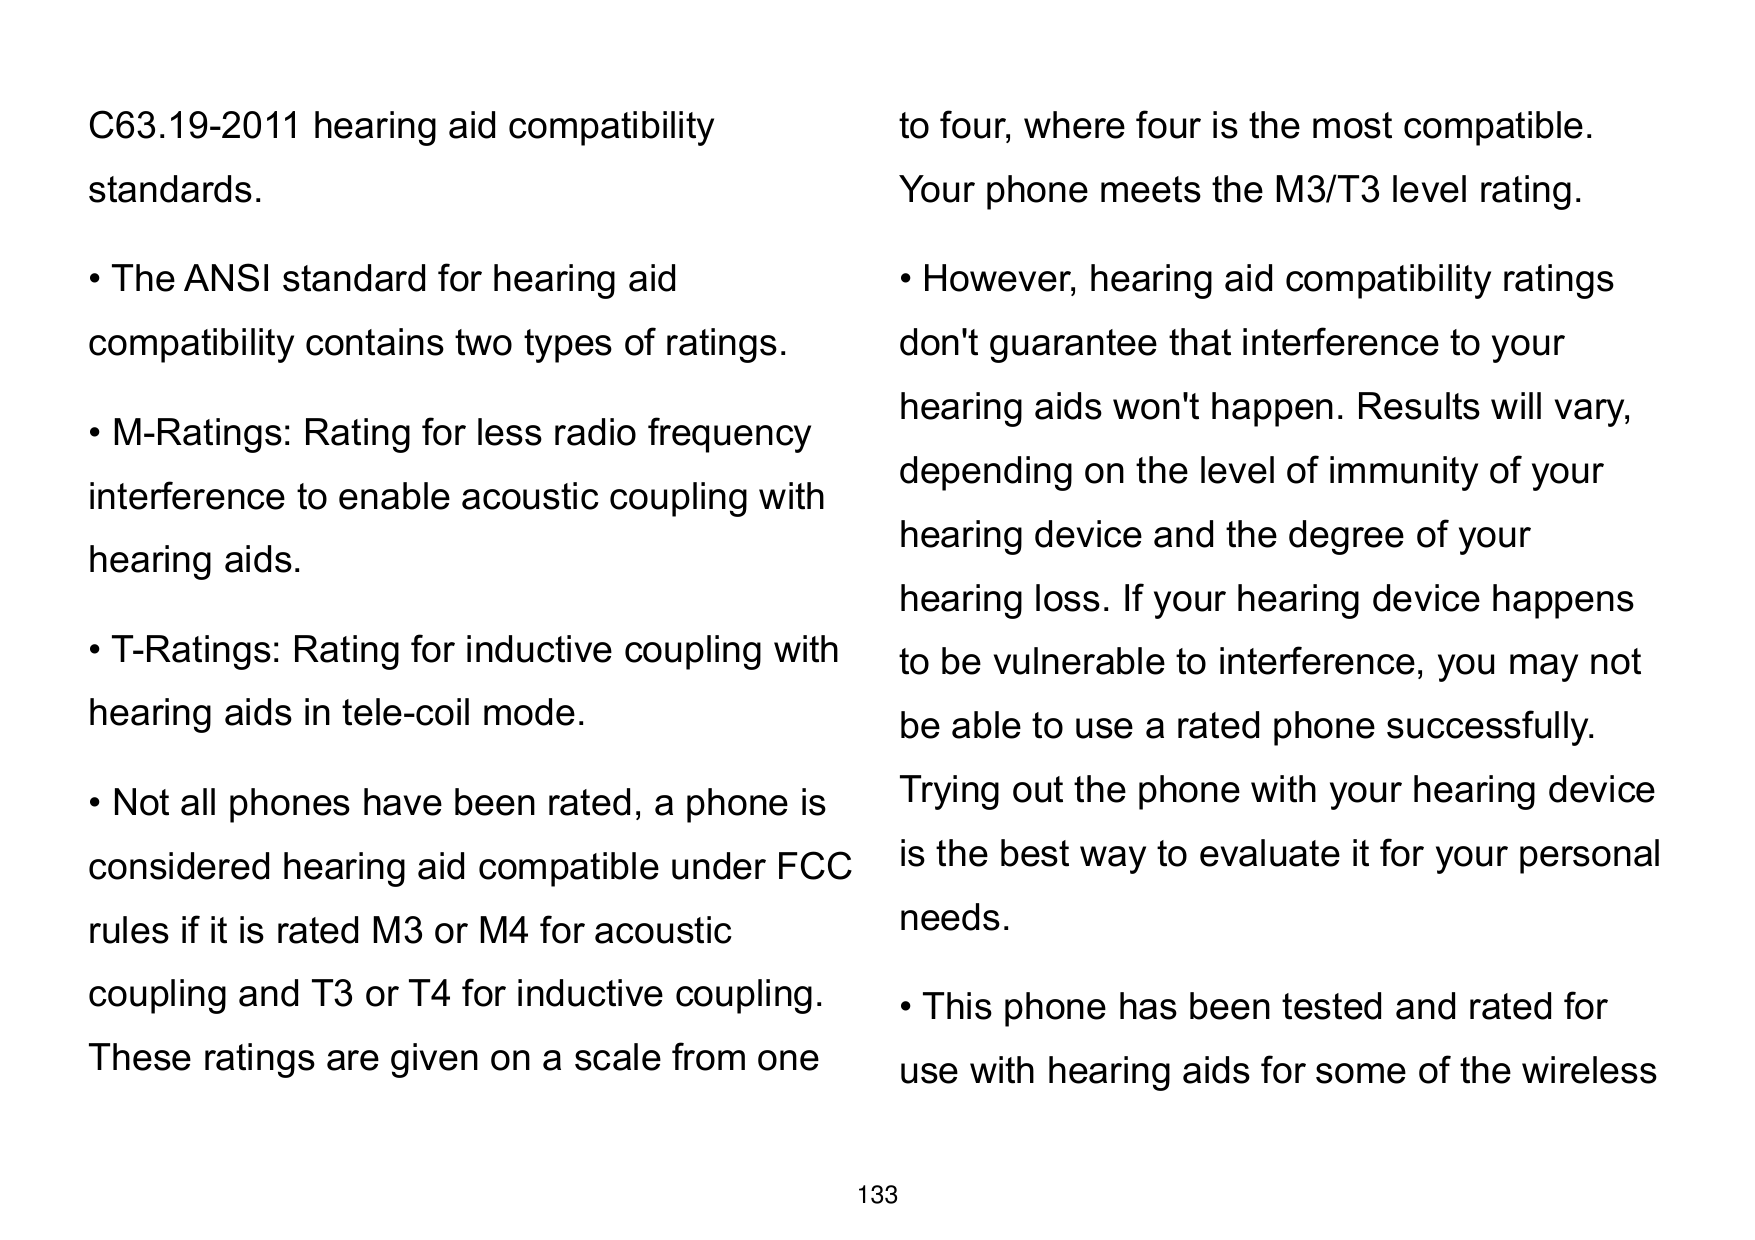 C63.19-2011 hearing aid compatibilityto four, where four is the most compatible.standards.Your phone meets the M3/T3 level ratin